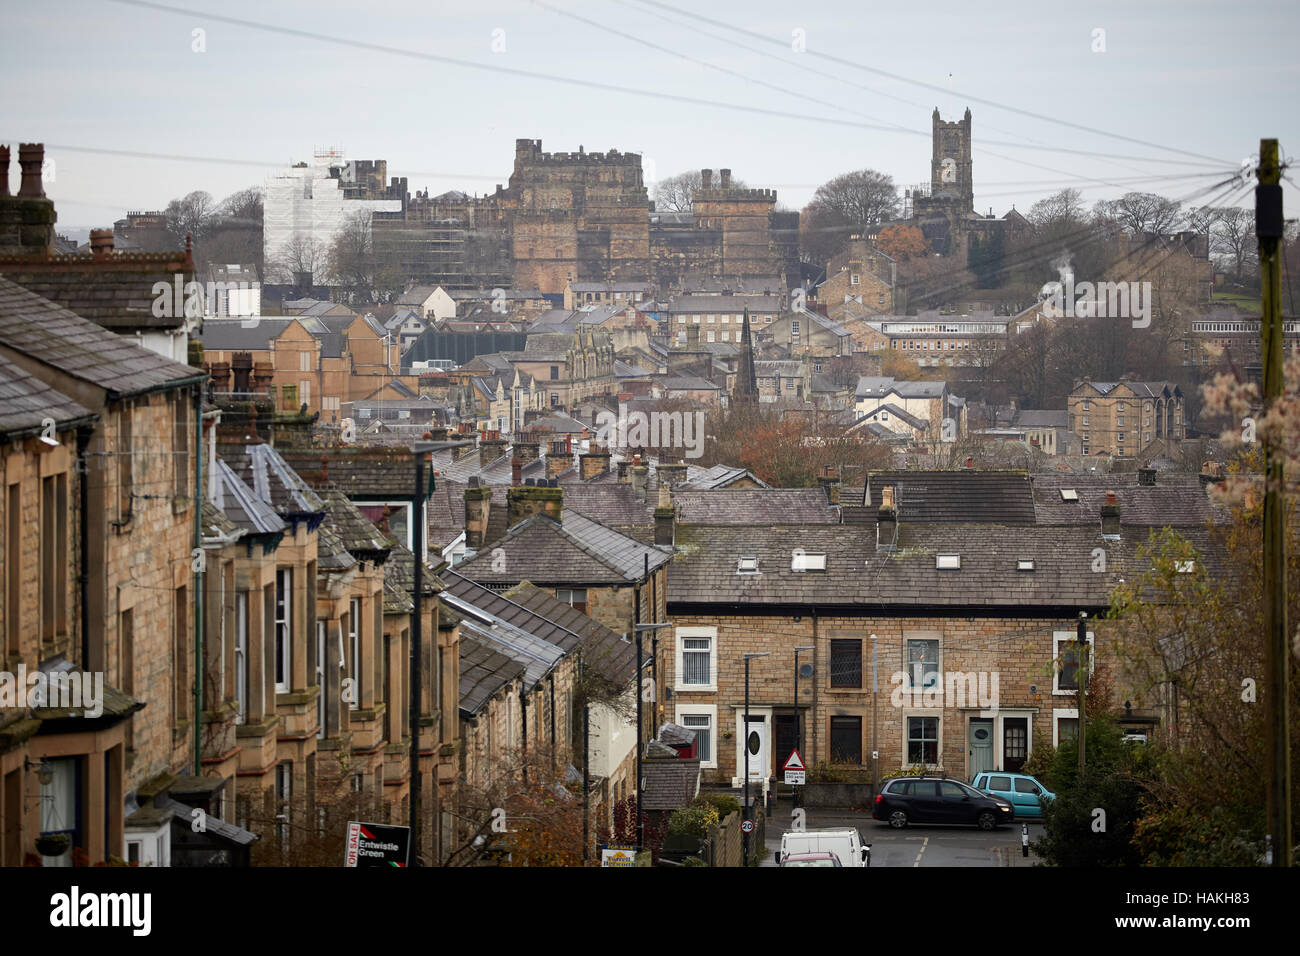 Lancashire Lancaster street scene skyline   Town centre backdrop looking down steep hill terraced houses stone traditional cityscape landscape parked Stock Photo